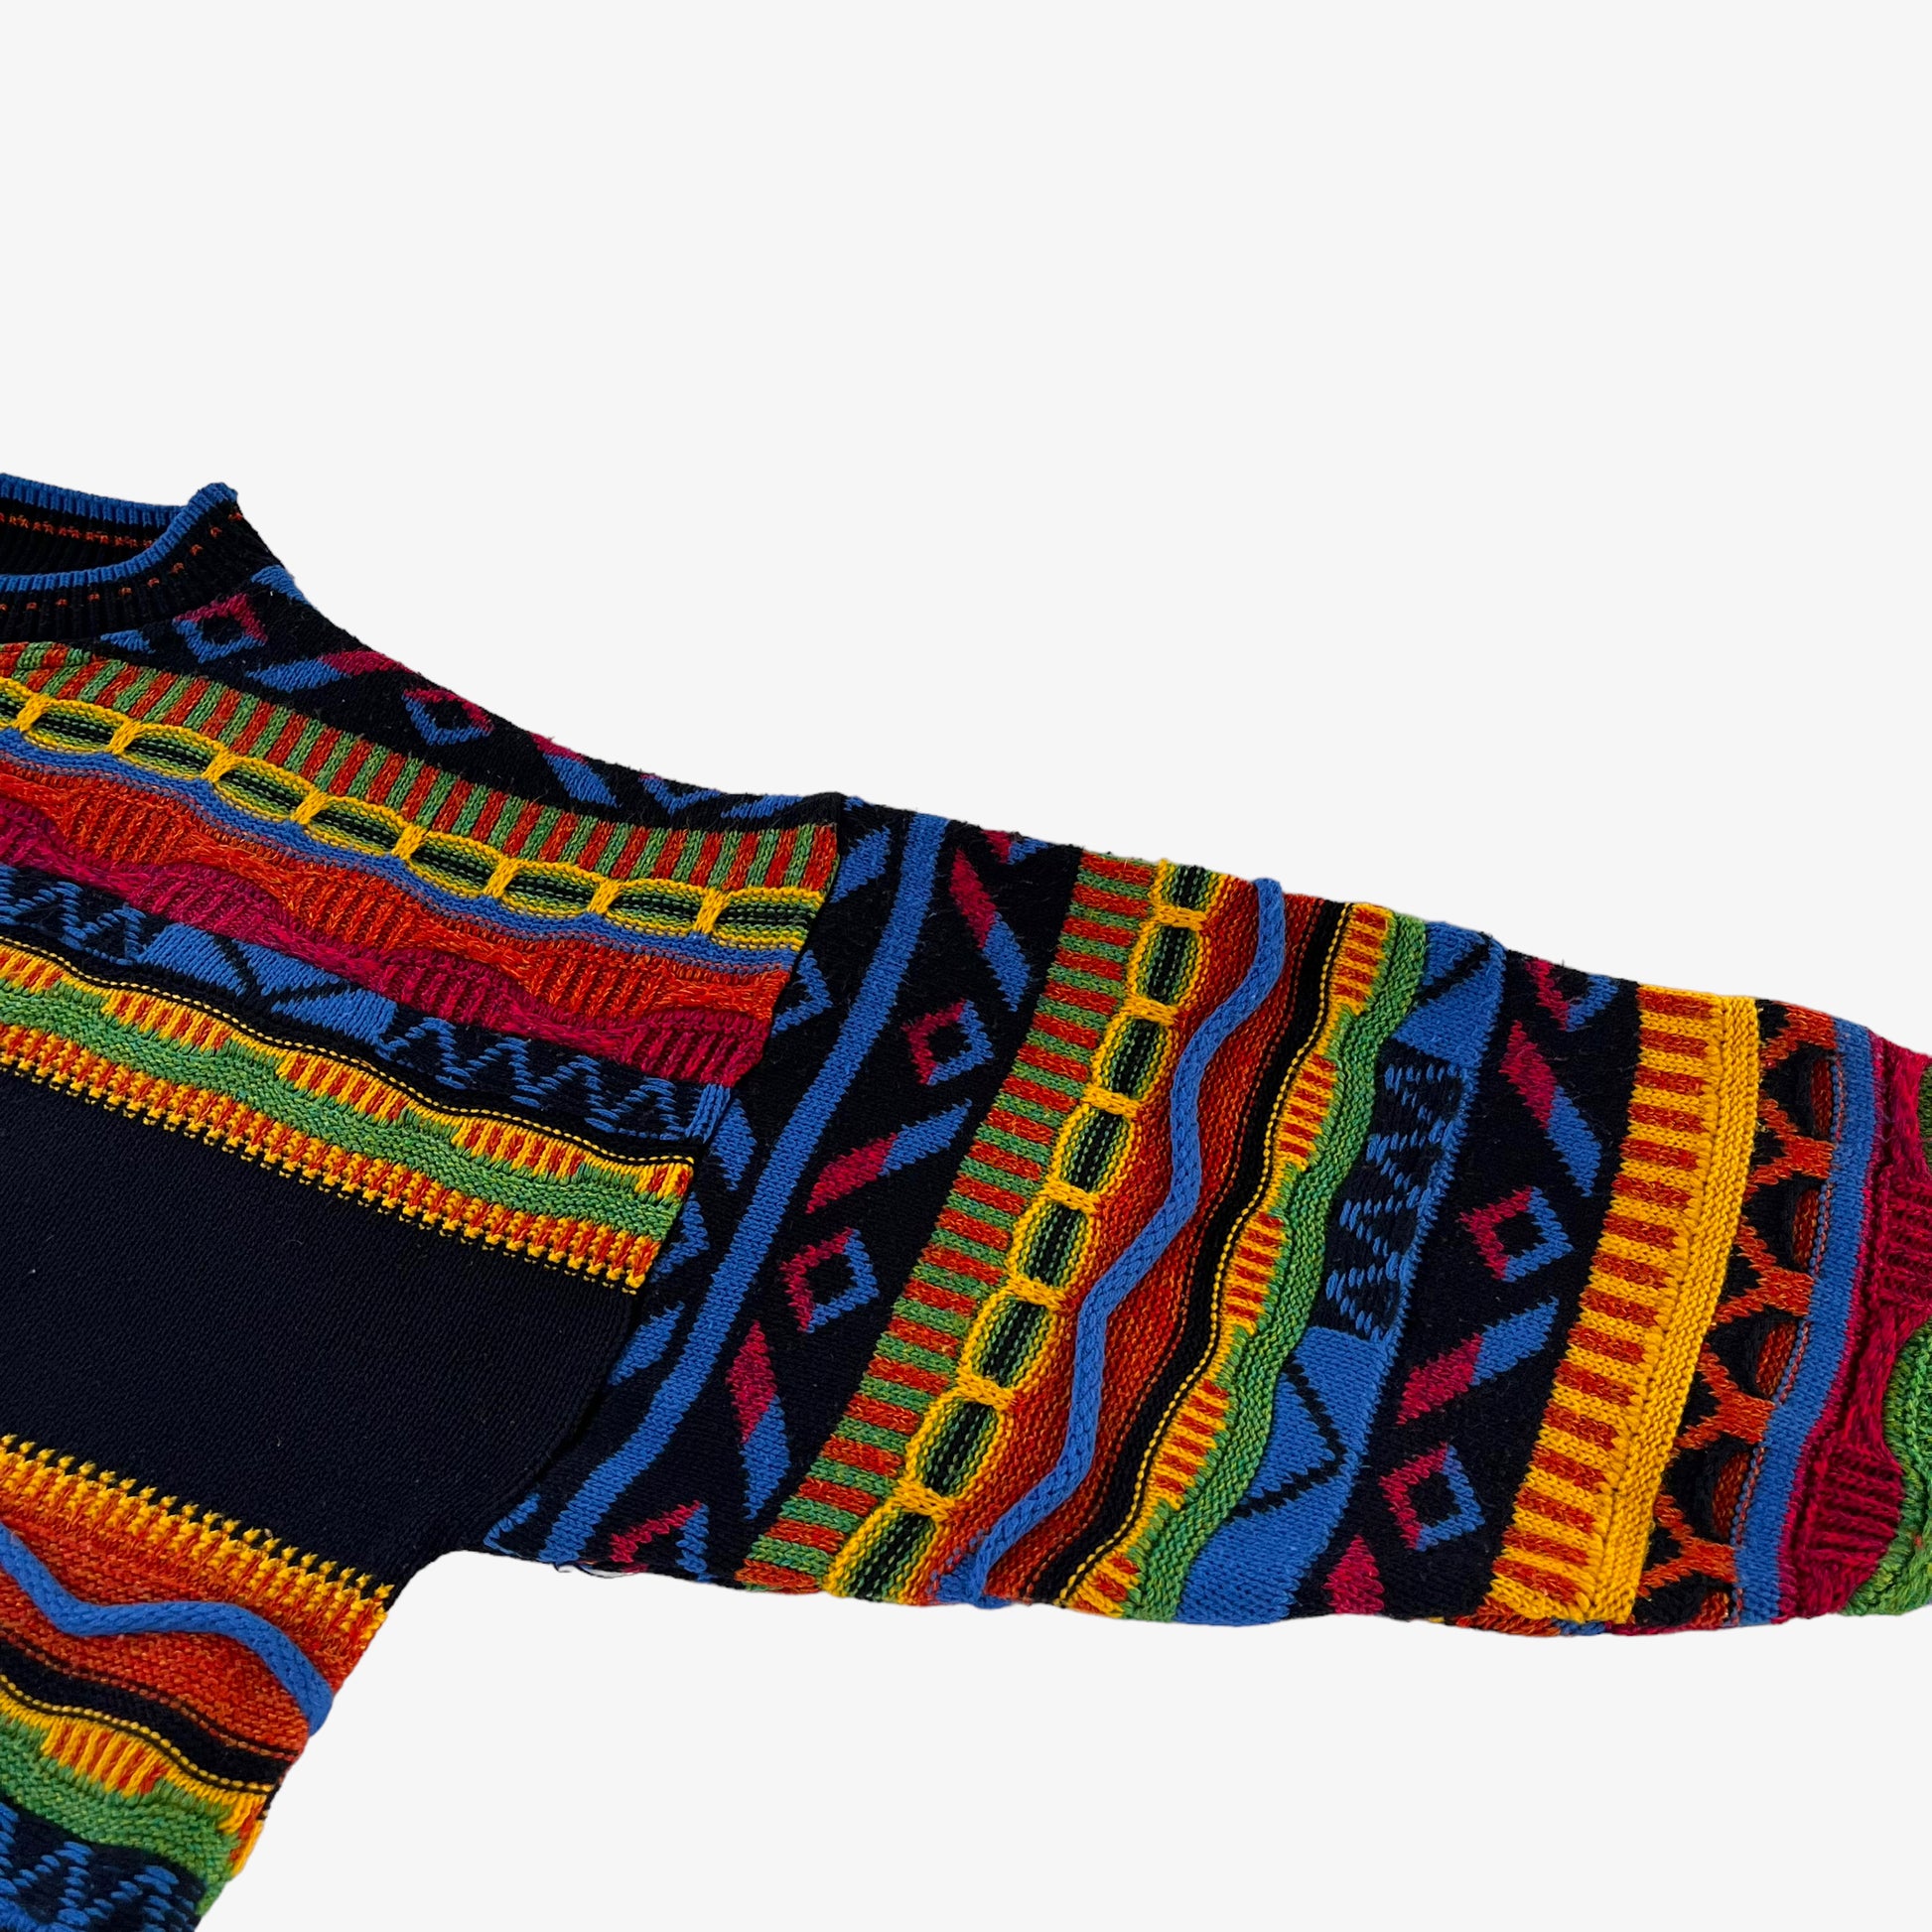 Vintage 90s The Sweater Shop 3D Textured Colourful Knitted Jumper Arm - Casspios Dream